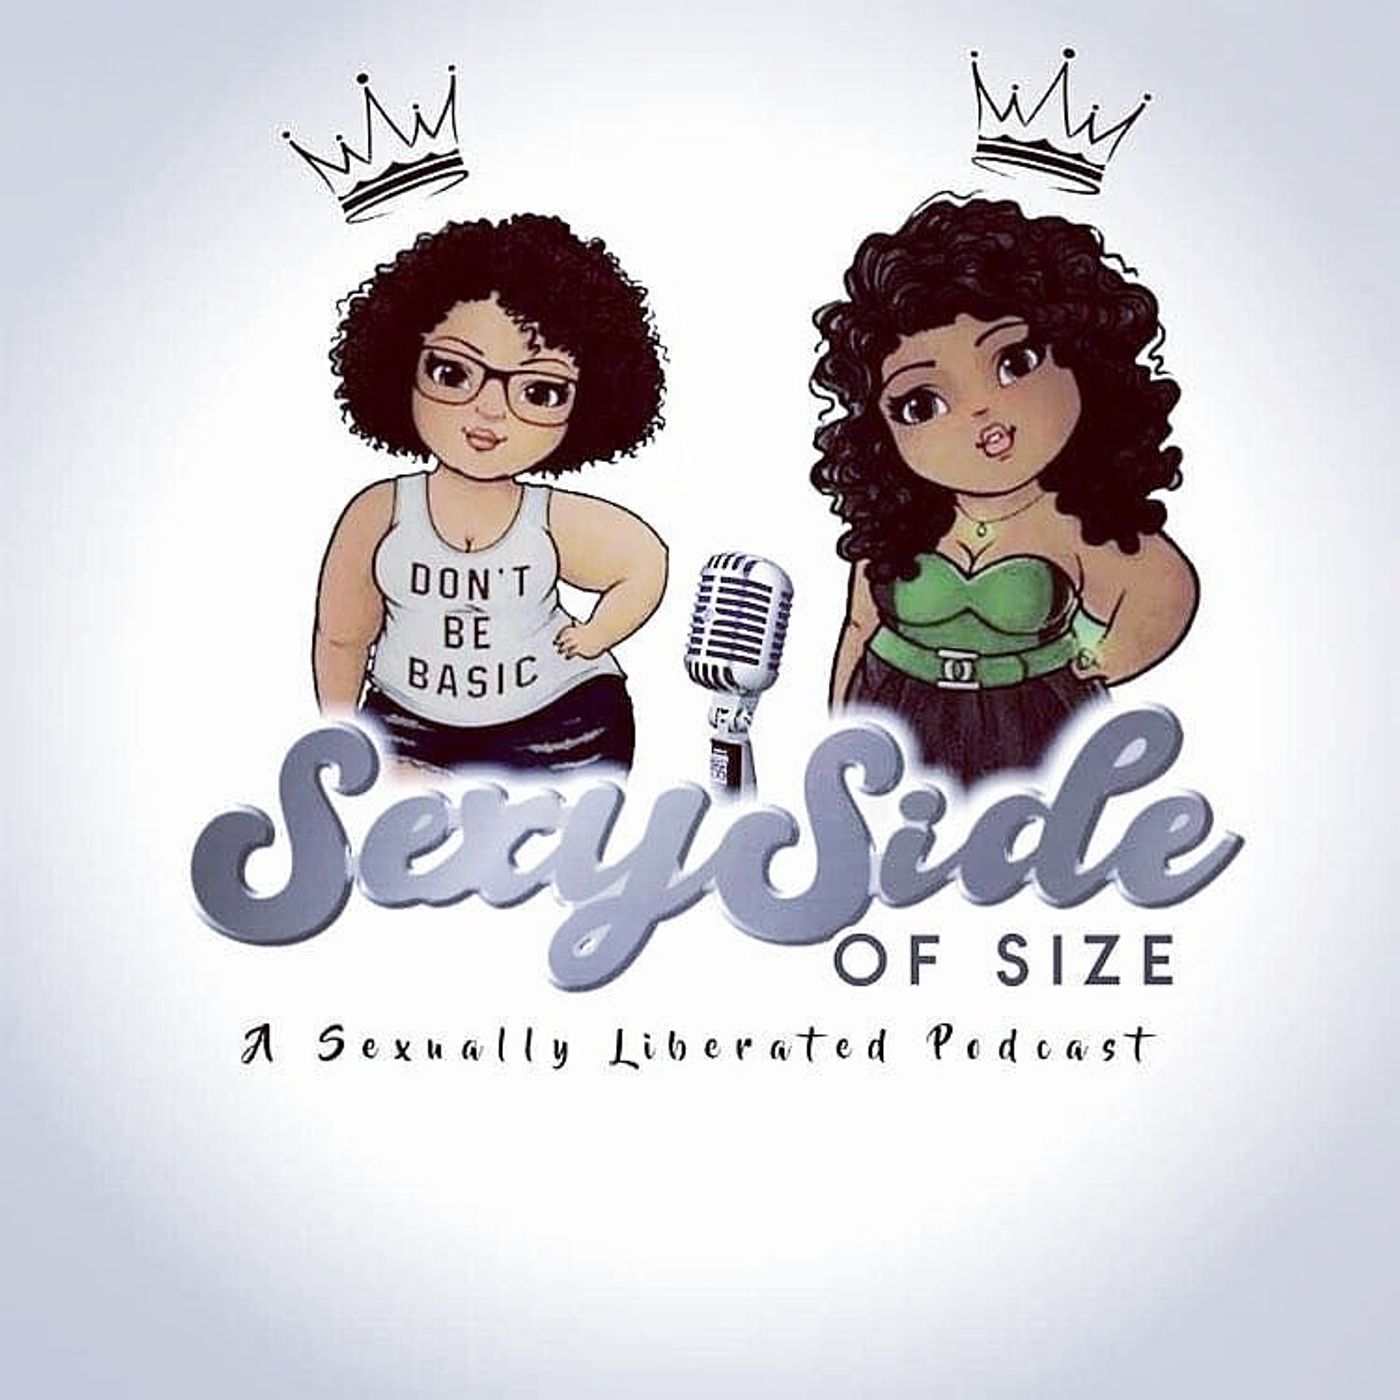 "The Sexy Side of Size"